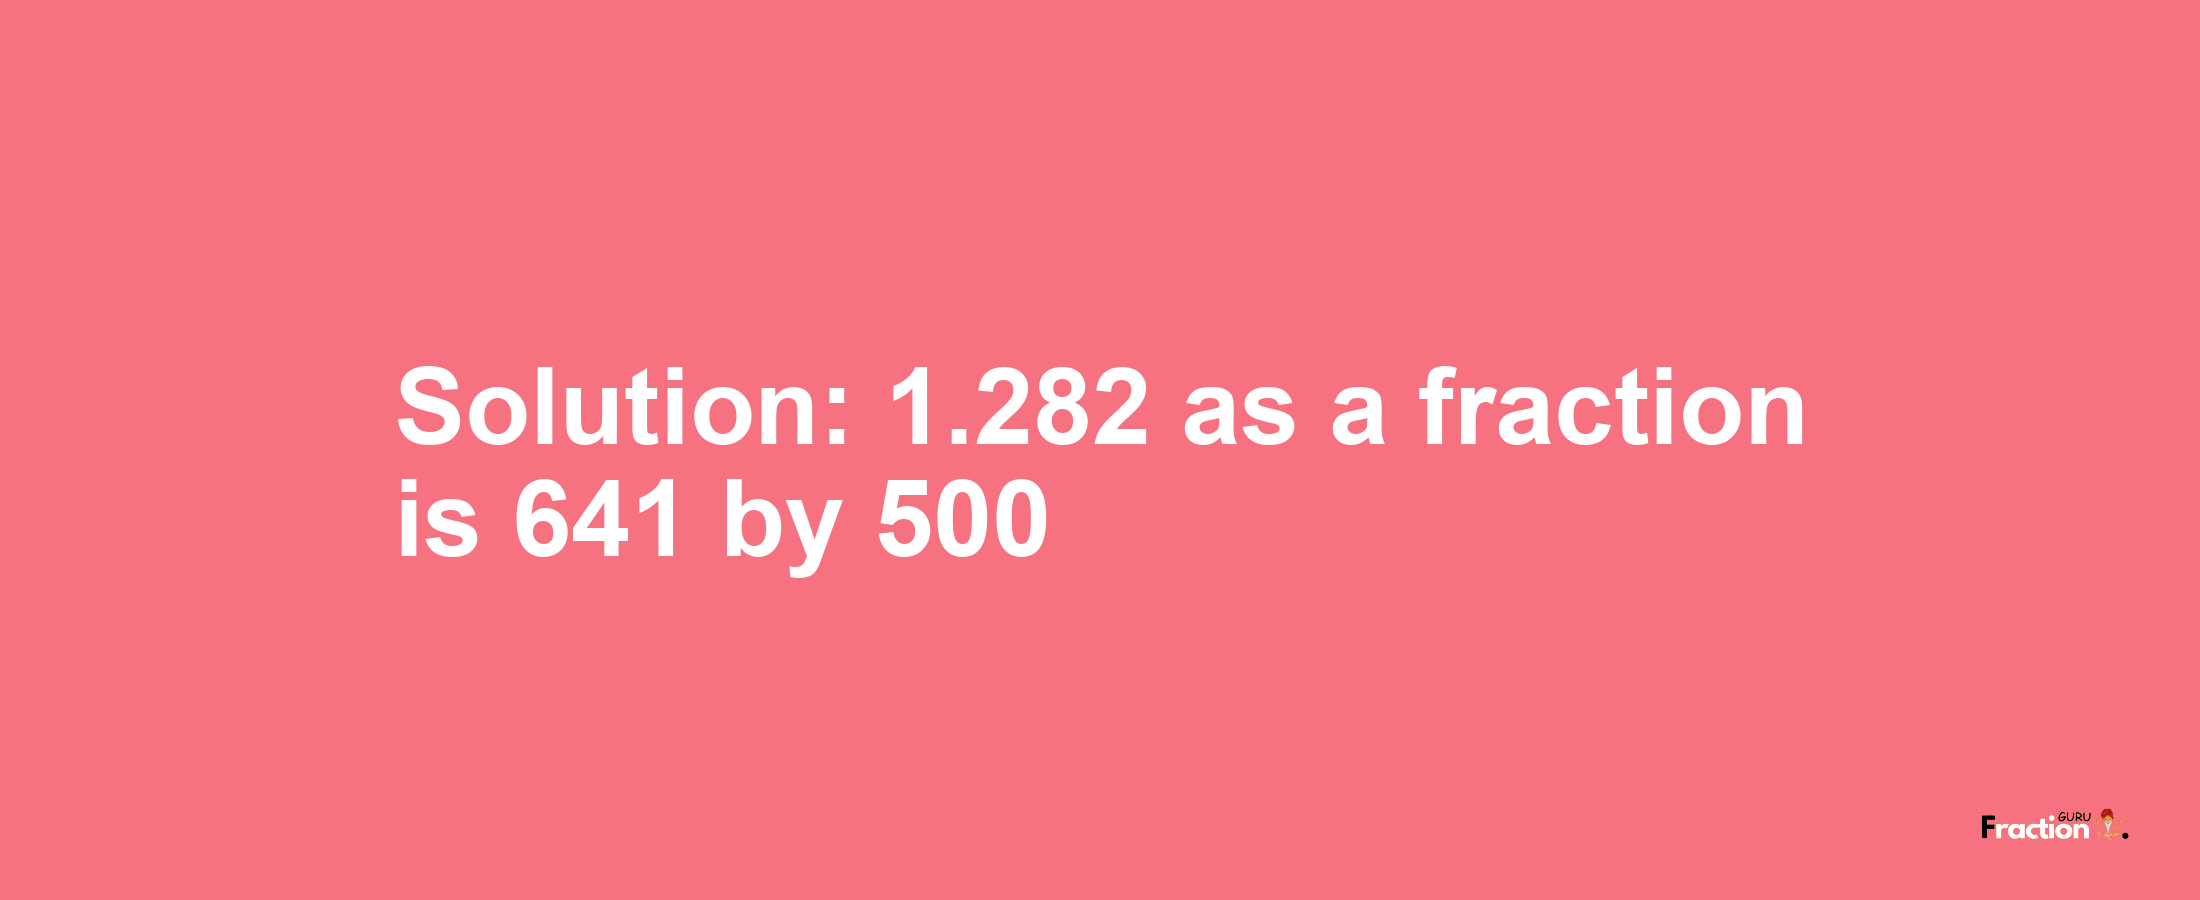 Solution:1.282 as a fraction is 641/500